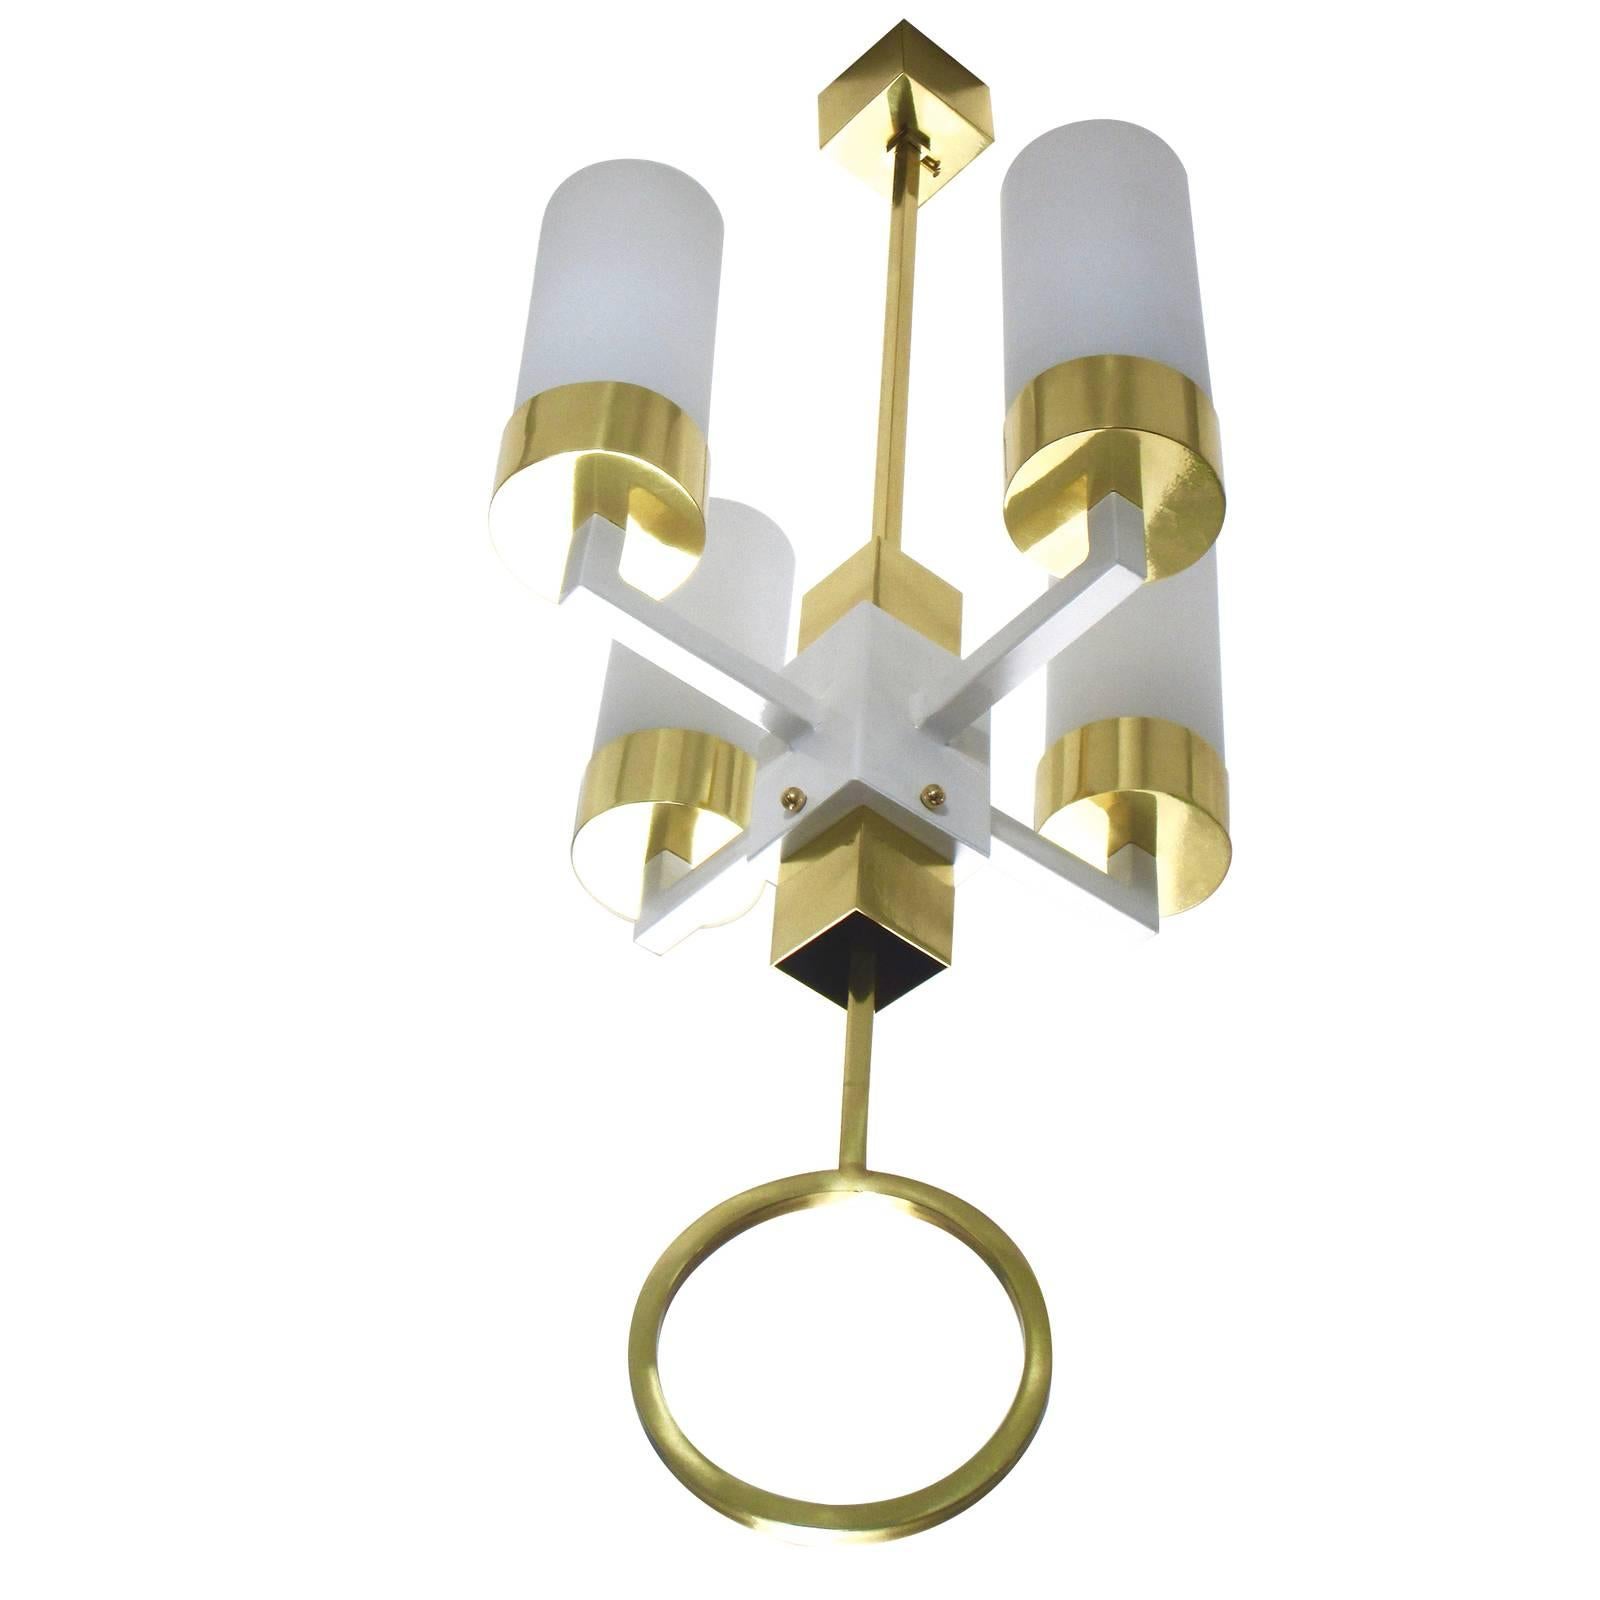 The perfect centrepiece in an entryway, dining room, and loft space, the peculiarity of this chandelier is the large brass circle suspended from the bottom finial that creates a balance of modern lines and traditional elegance. Four L-shaped arms